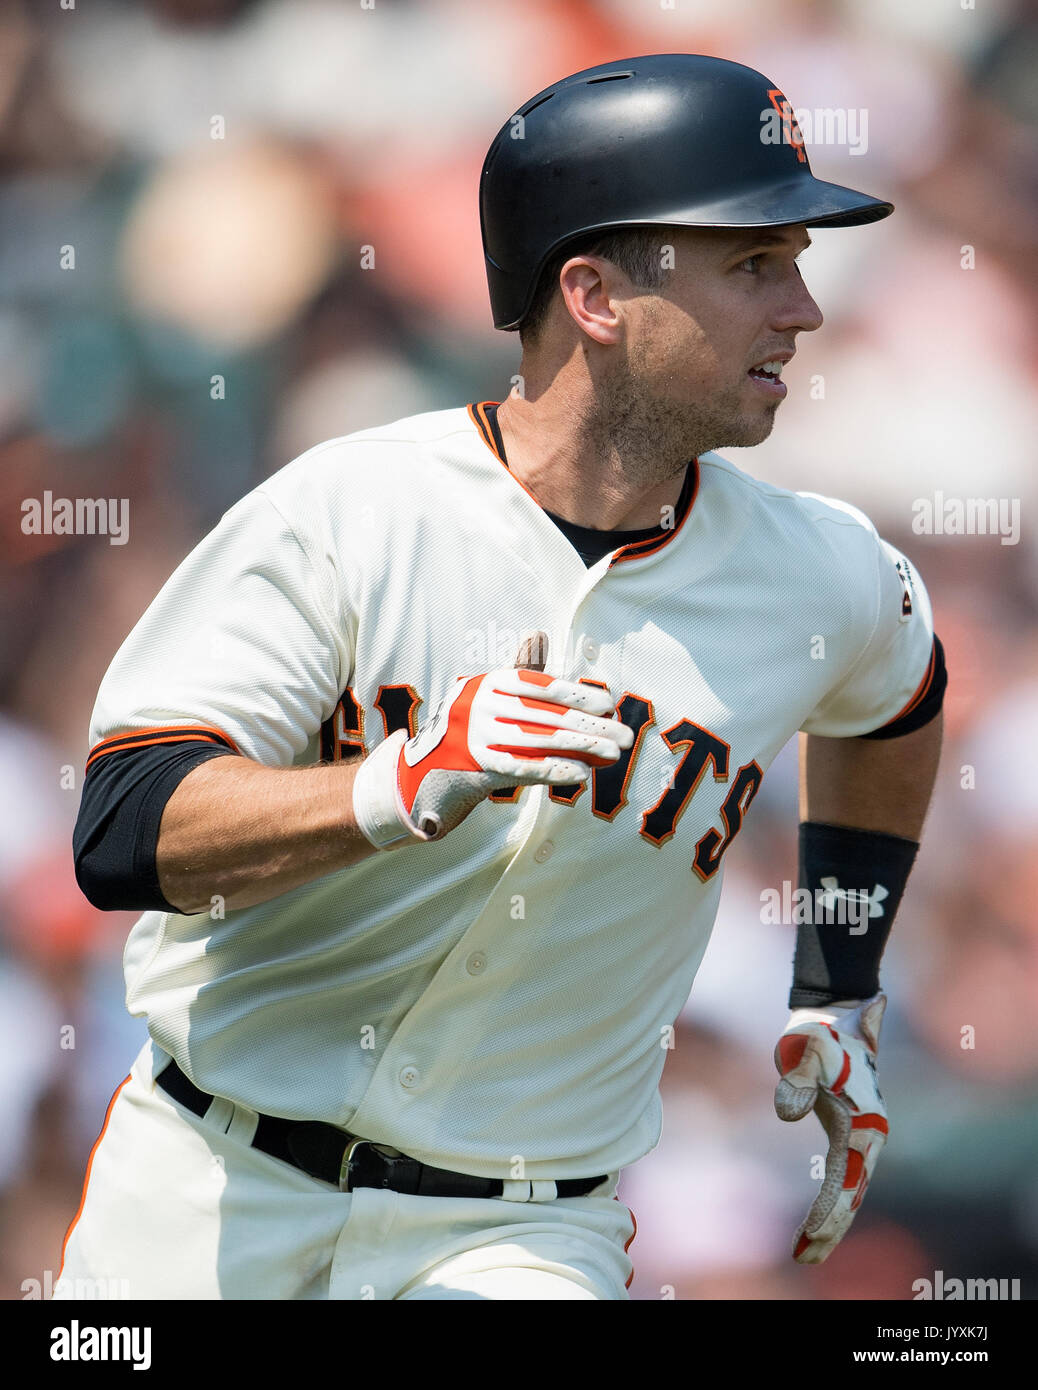 San Francisco, USA. 20th Aug, 2017. San Francisco Giants catcher Buster Posey (28) heading for first base, during a MLB game between the Philadelphia Phillies and the San Francisco Giants at AT&T Park in San Francisco, California. Credit: Cal Sport Media/Alamy Live News Stock Photo